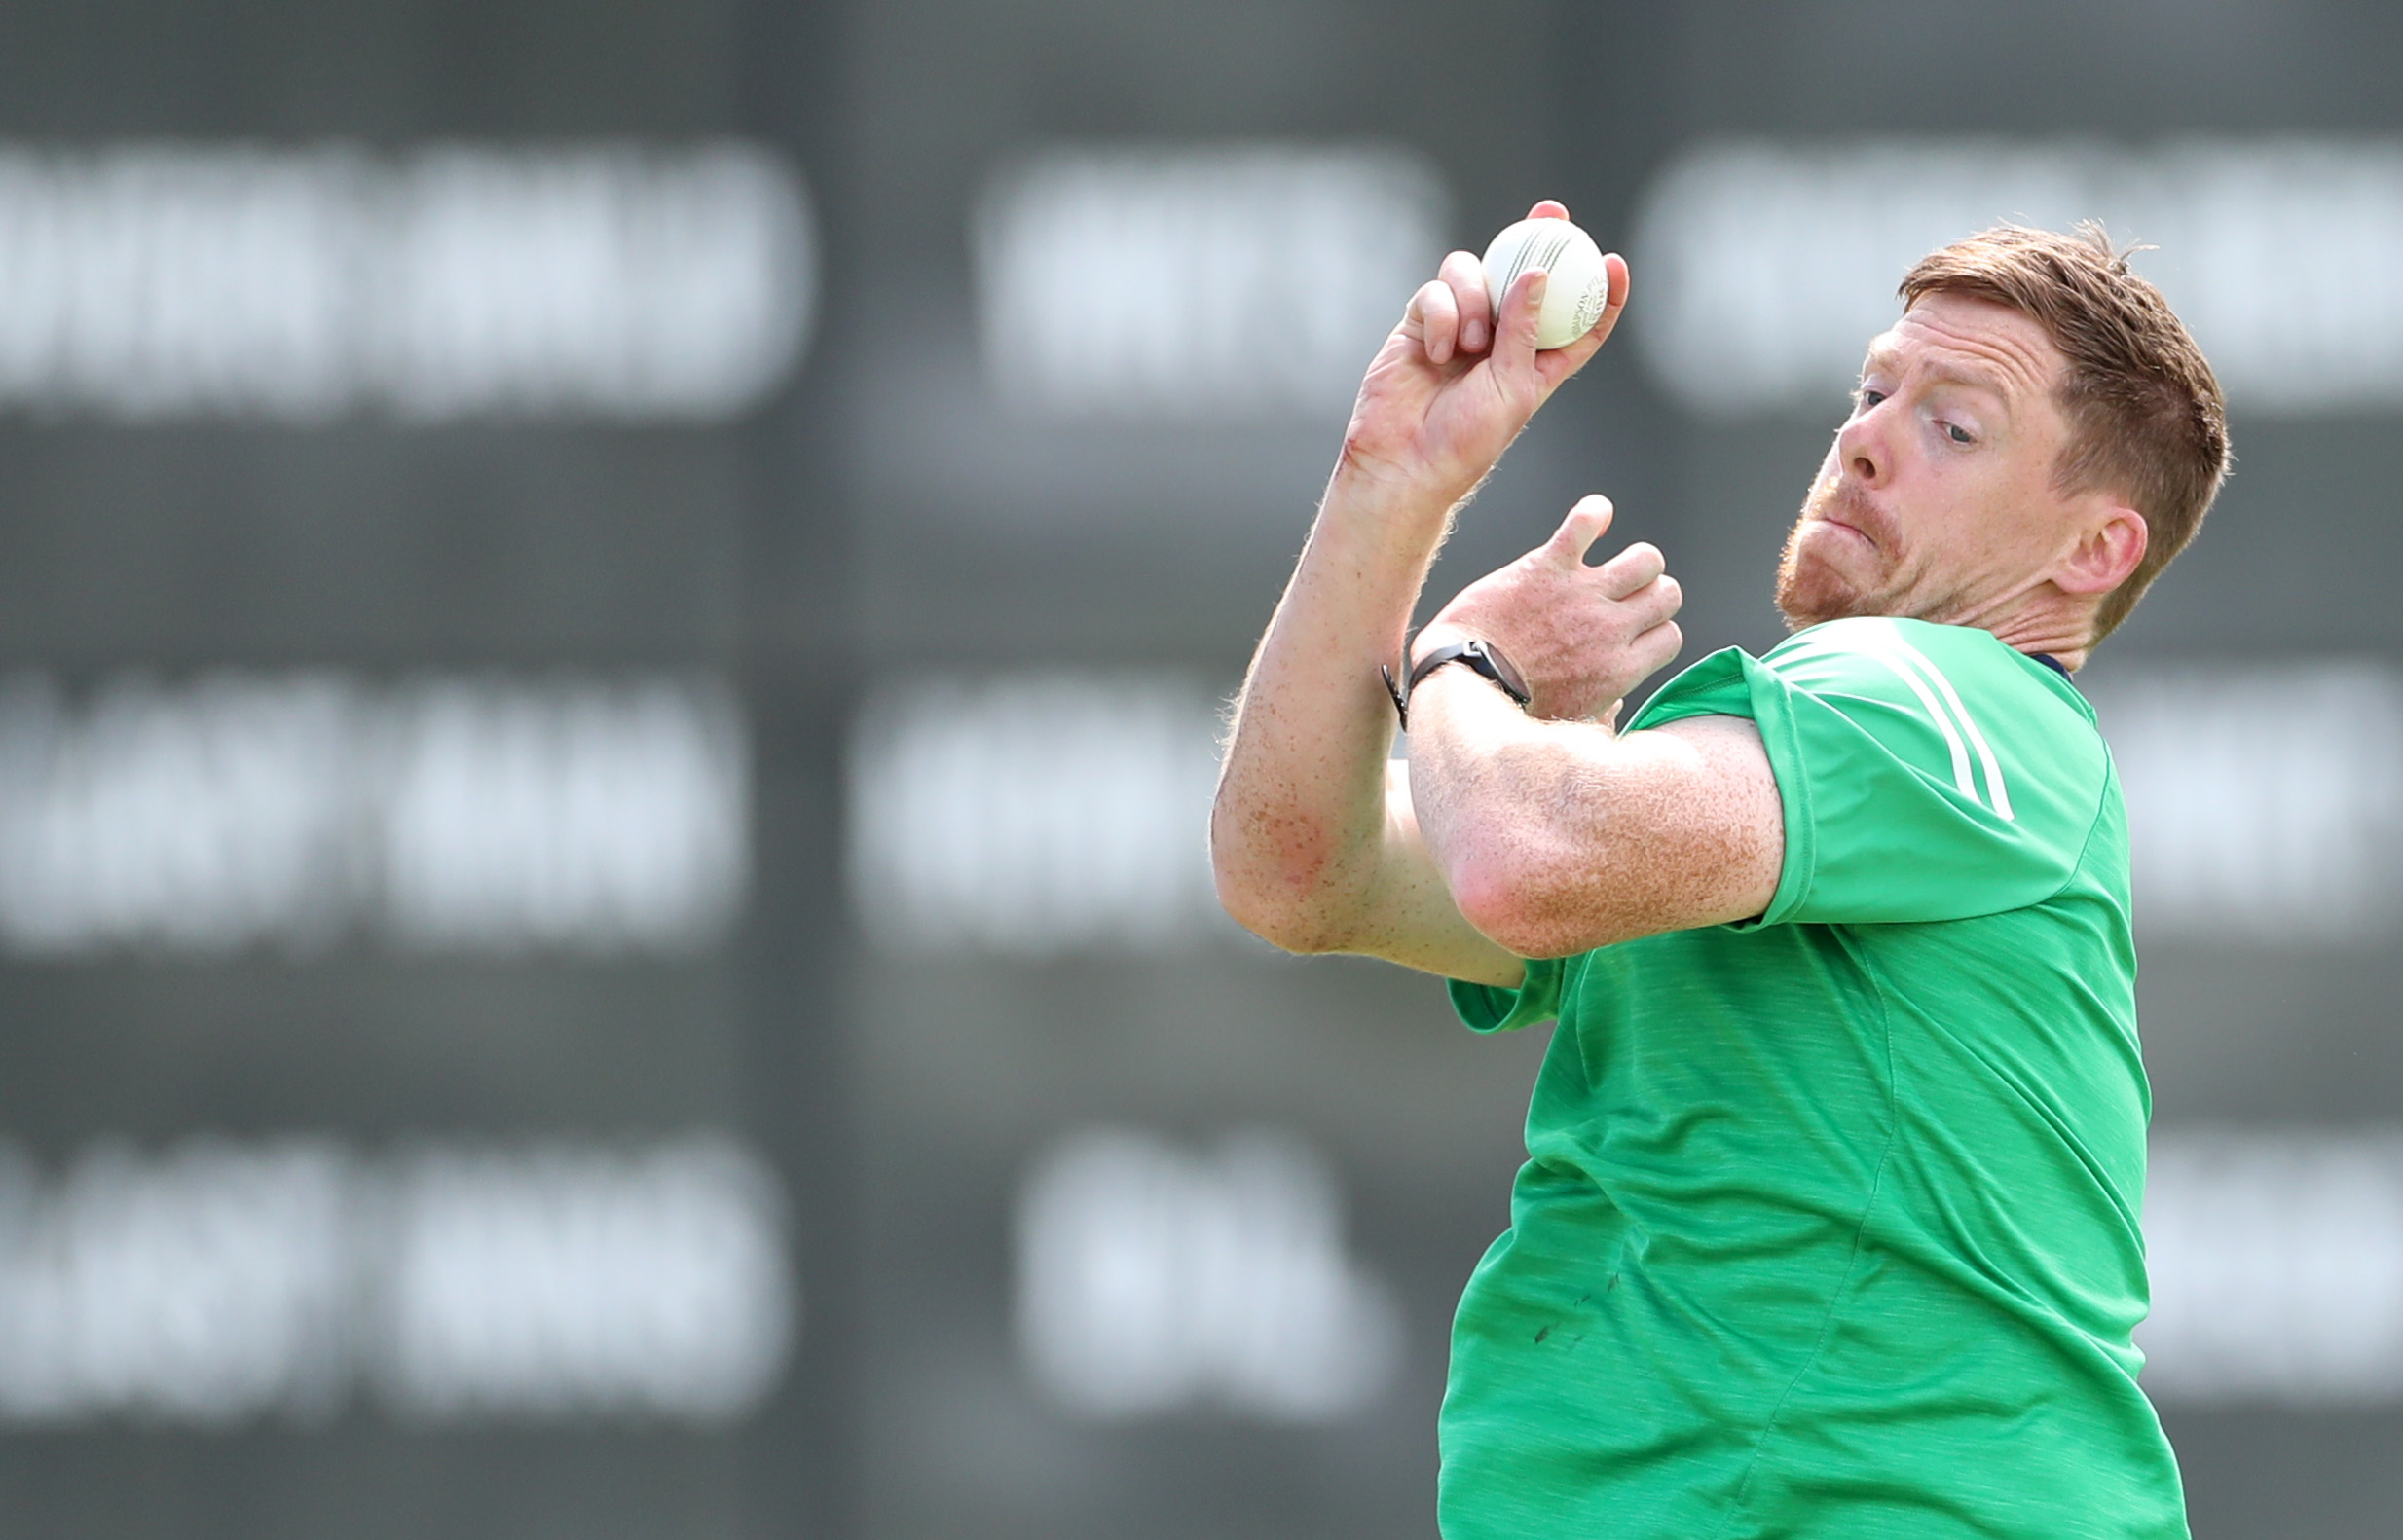 Cricket Ireland: Craig Young - We went toe-to-toe for 85% of the time, we just need to find that extra bit on Tuesday